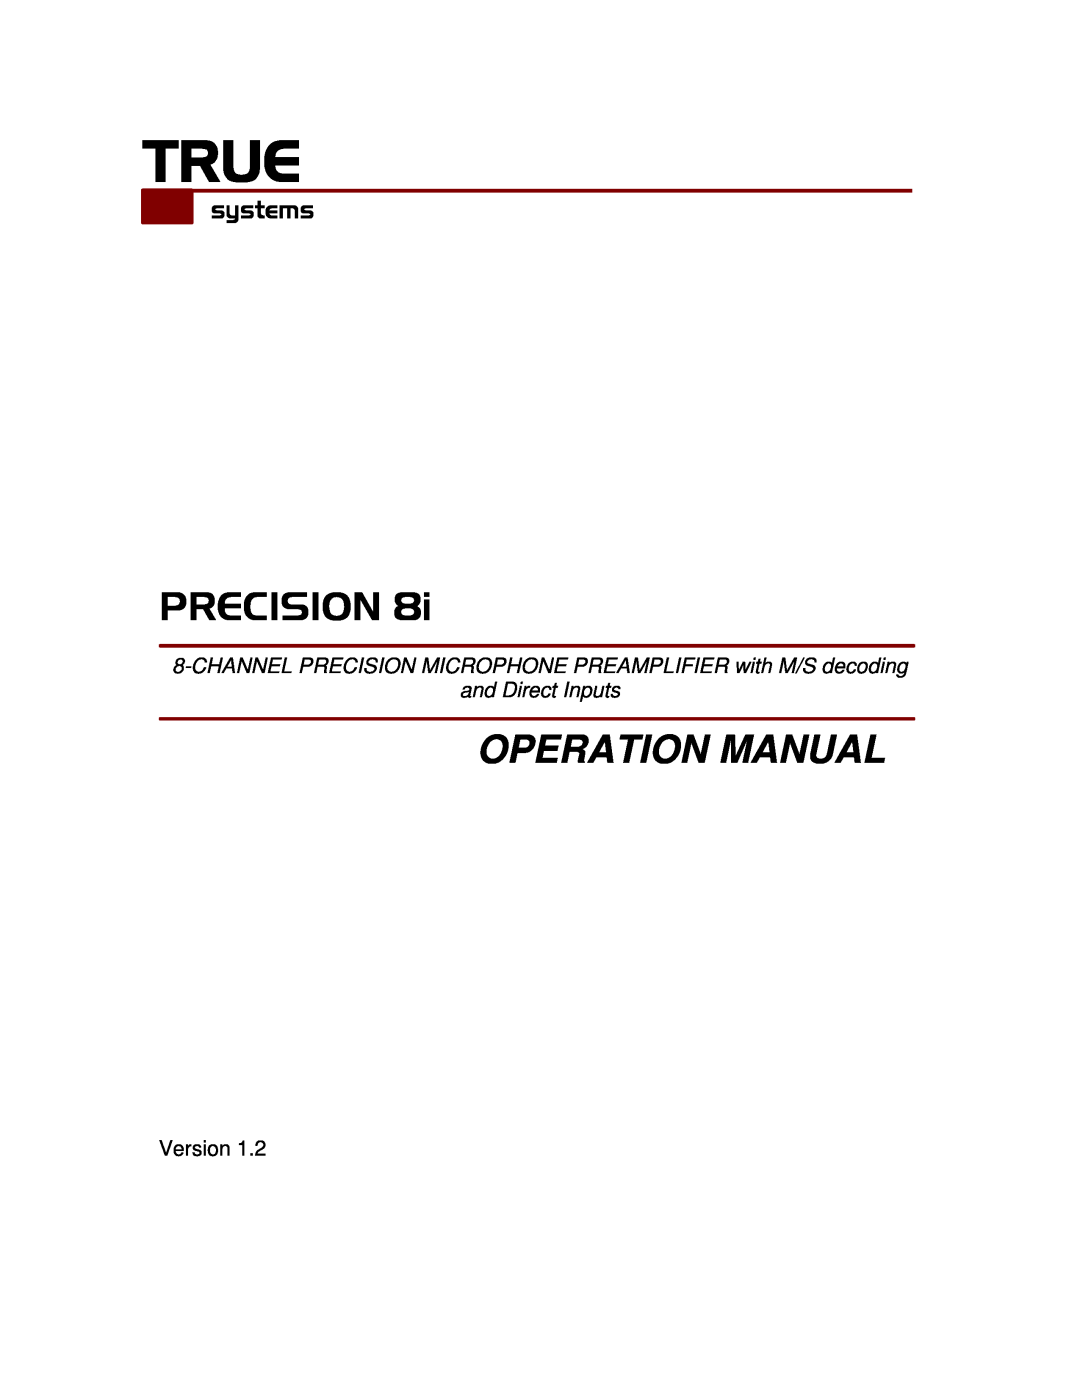 True Manufacturing Company PRECISION 8i operation manual True, Precision, systems, and Direct Inputs 